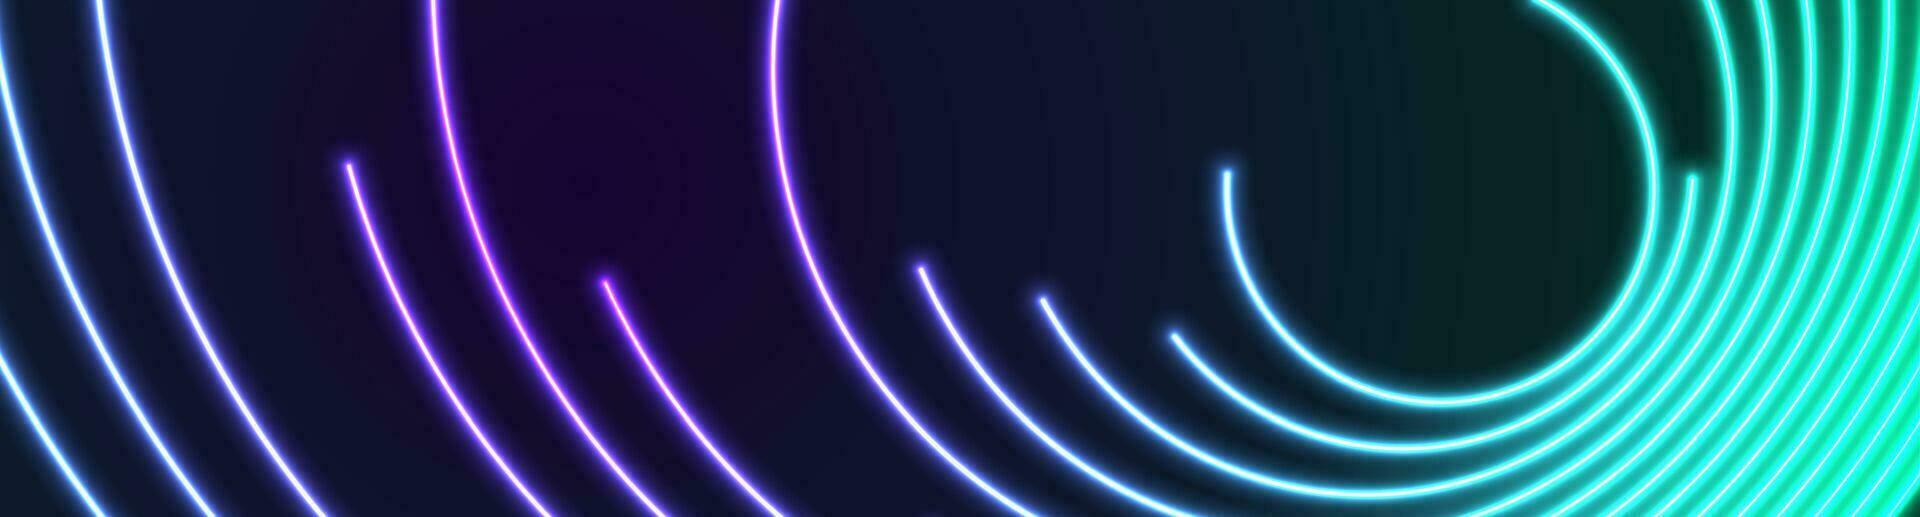 Bright cyan and violet neon circular lines abstract tech banner vector